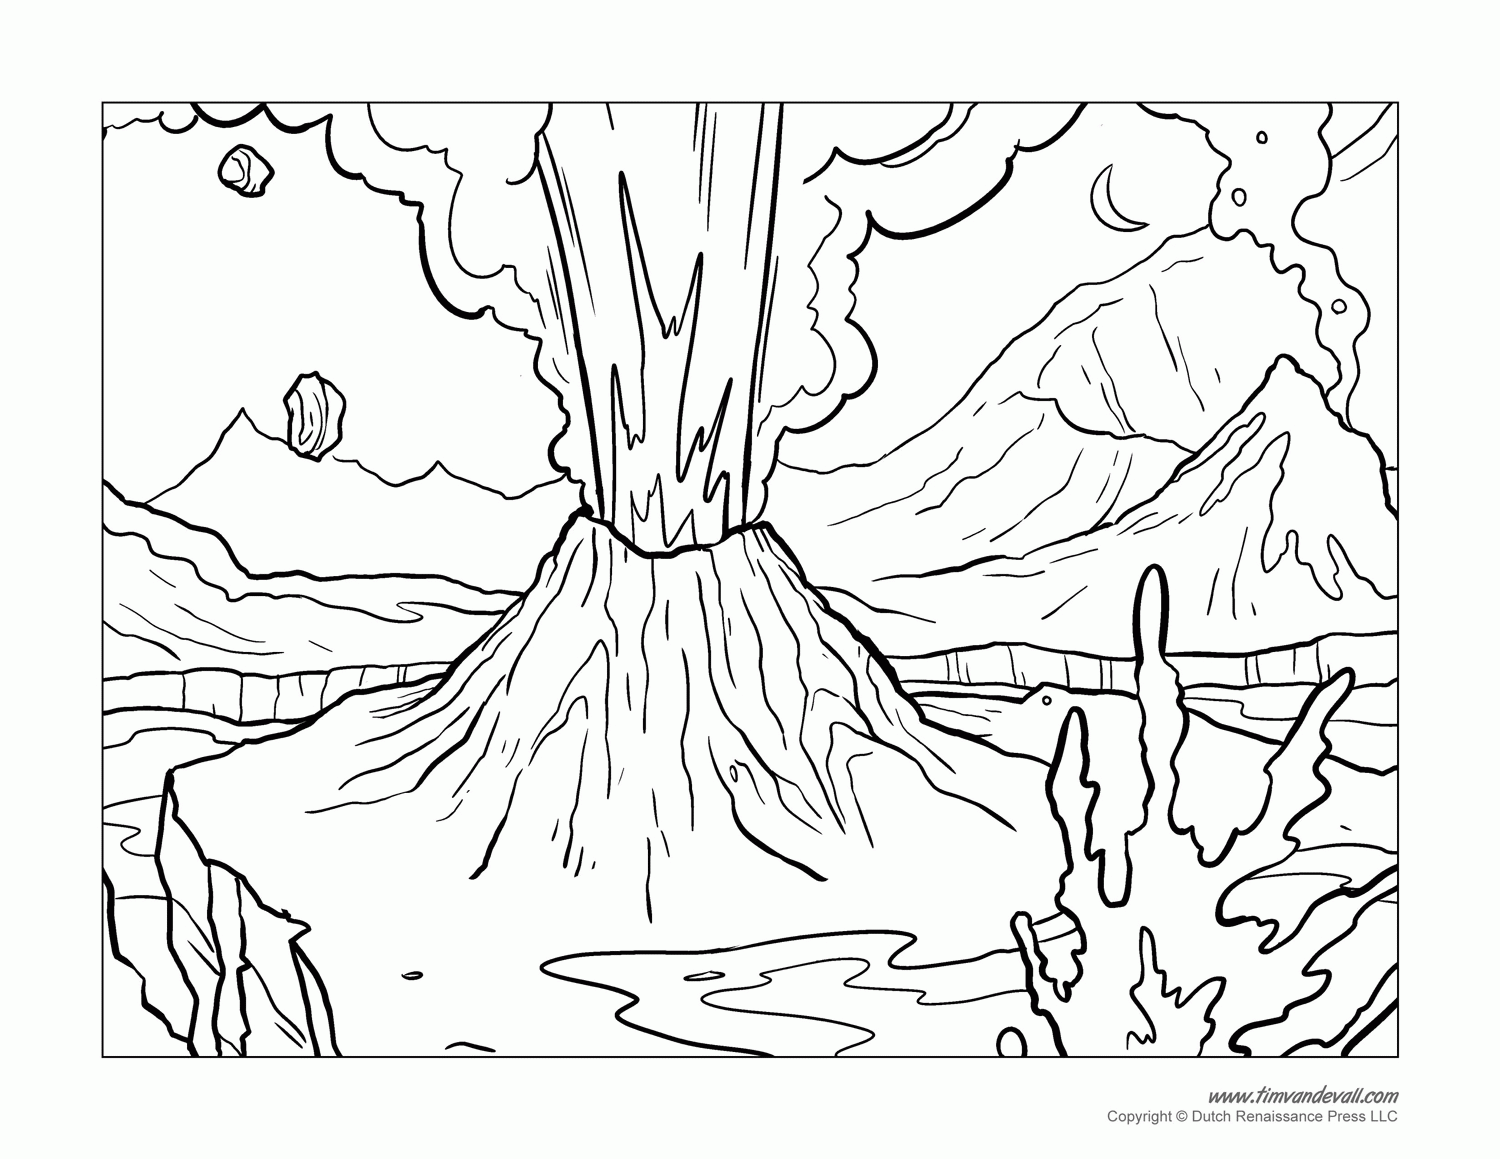 Volcano coloring page